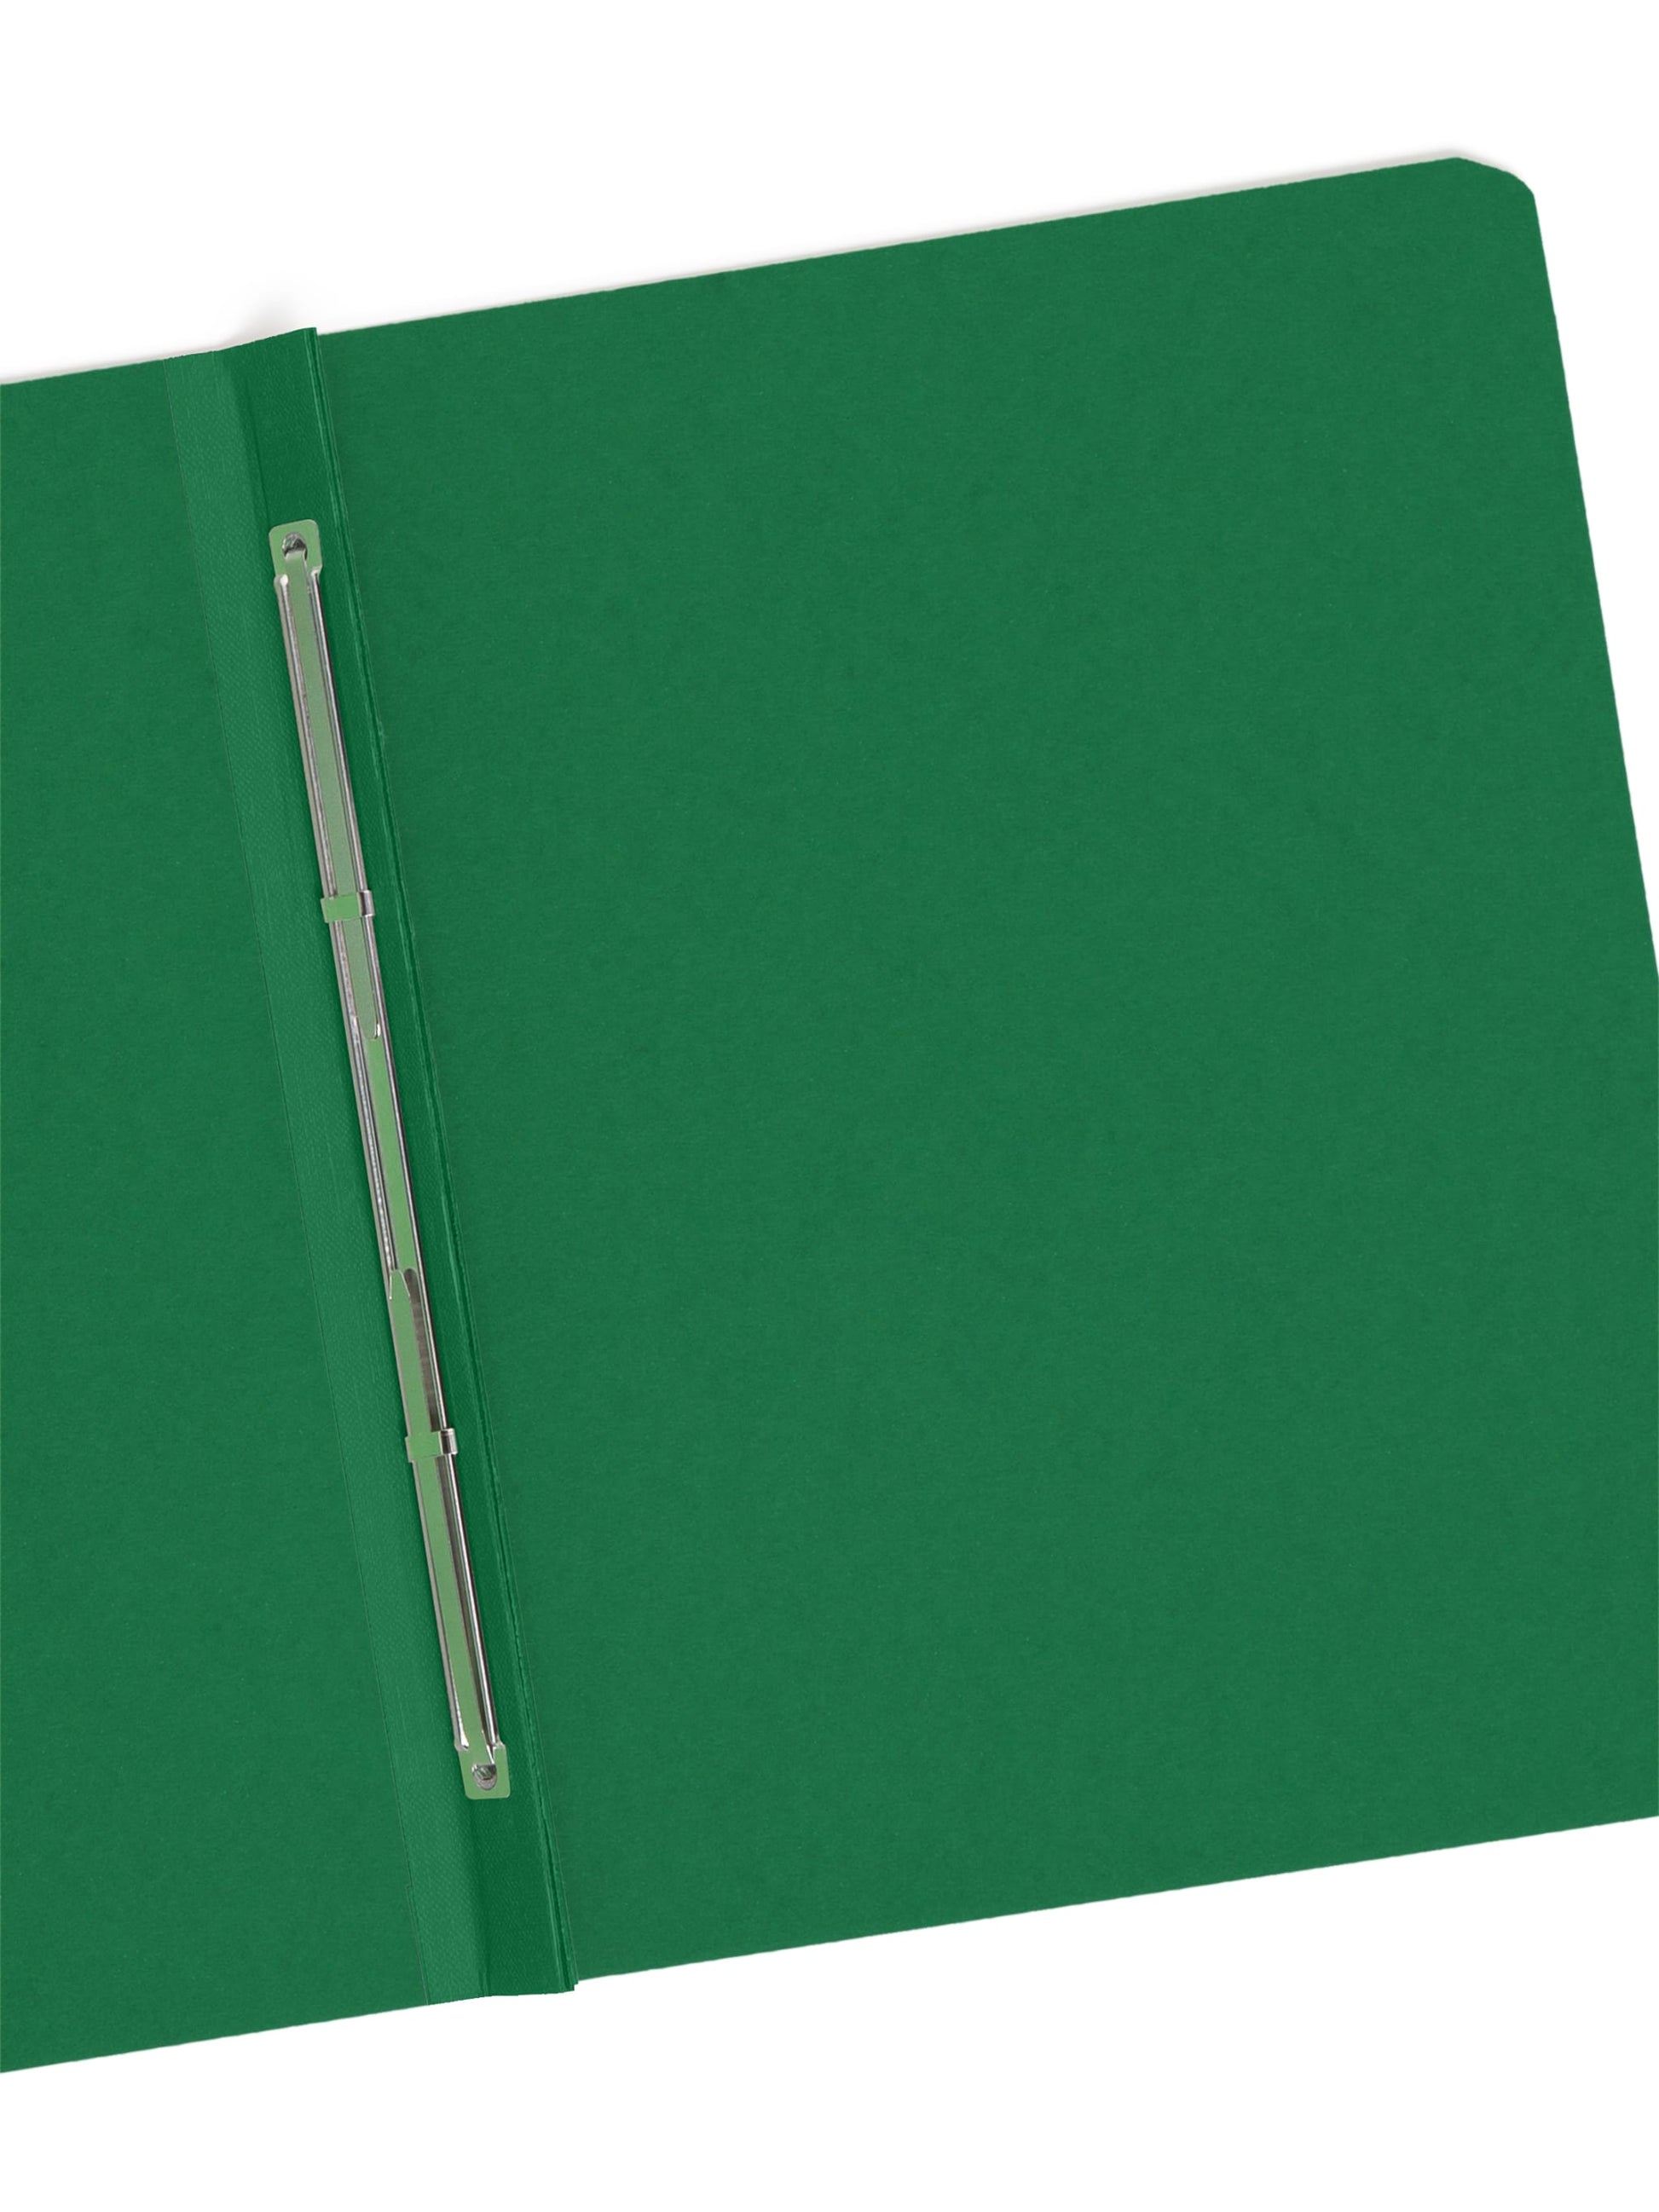 Premium Pressboard Report Covers, 8 1/2-inch Metal Prong Side Fastener with Compressor, 3-inch Expansion, Green Color, Letter Size, Set of 1, 086486814522